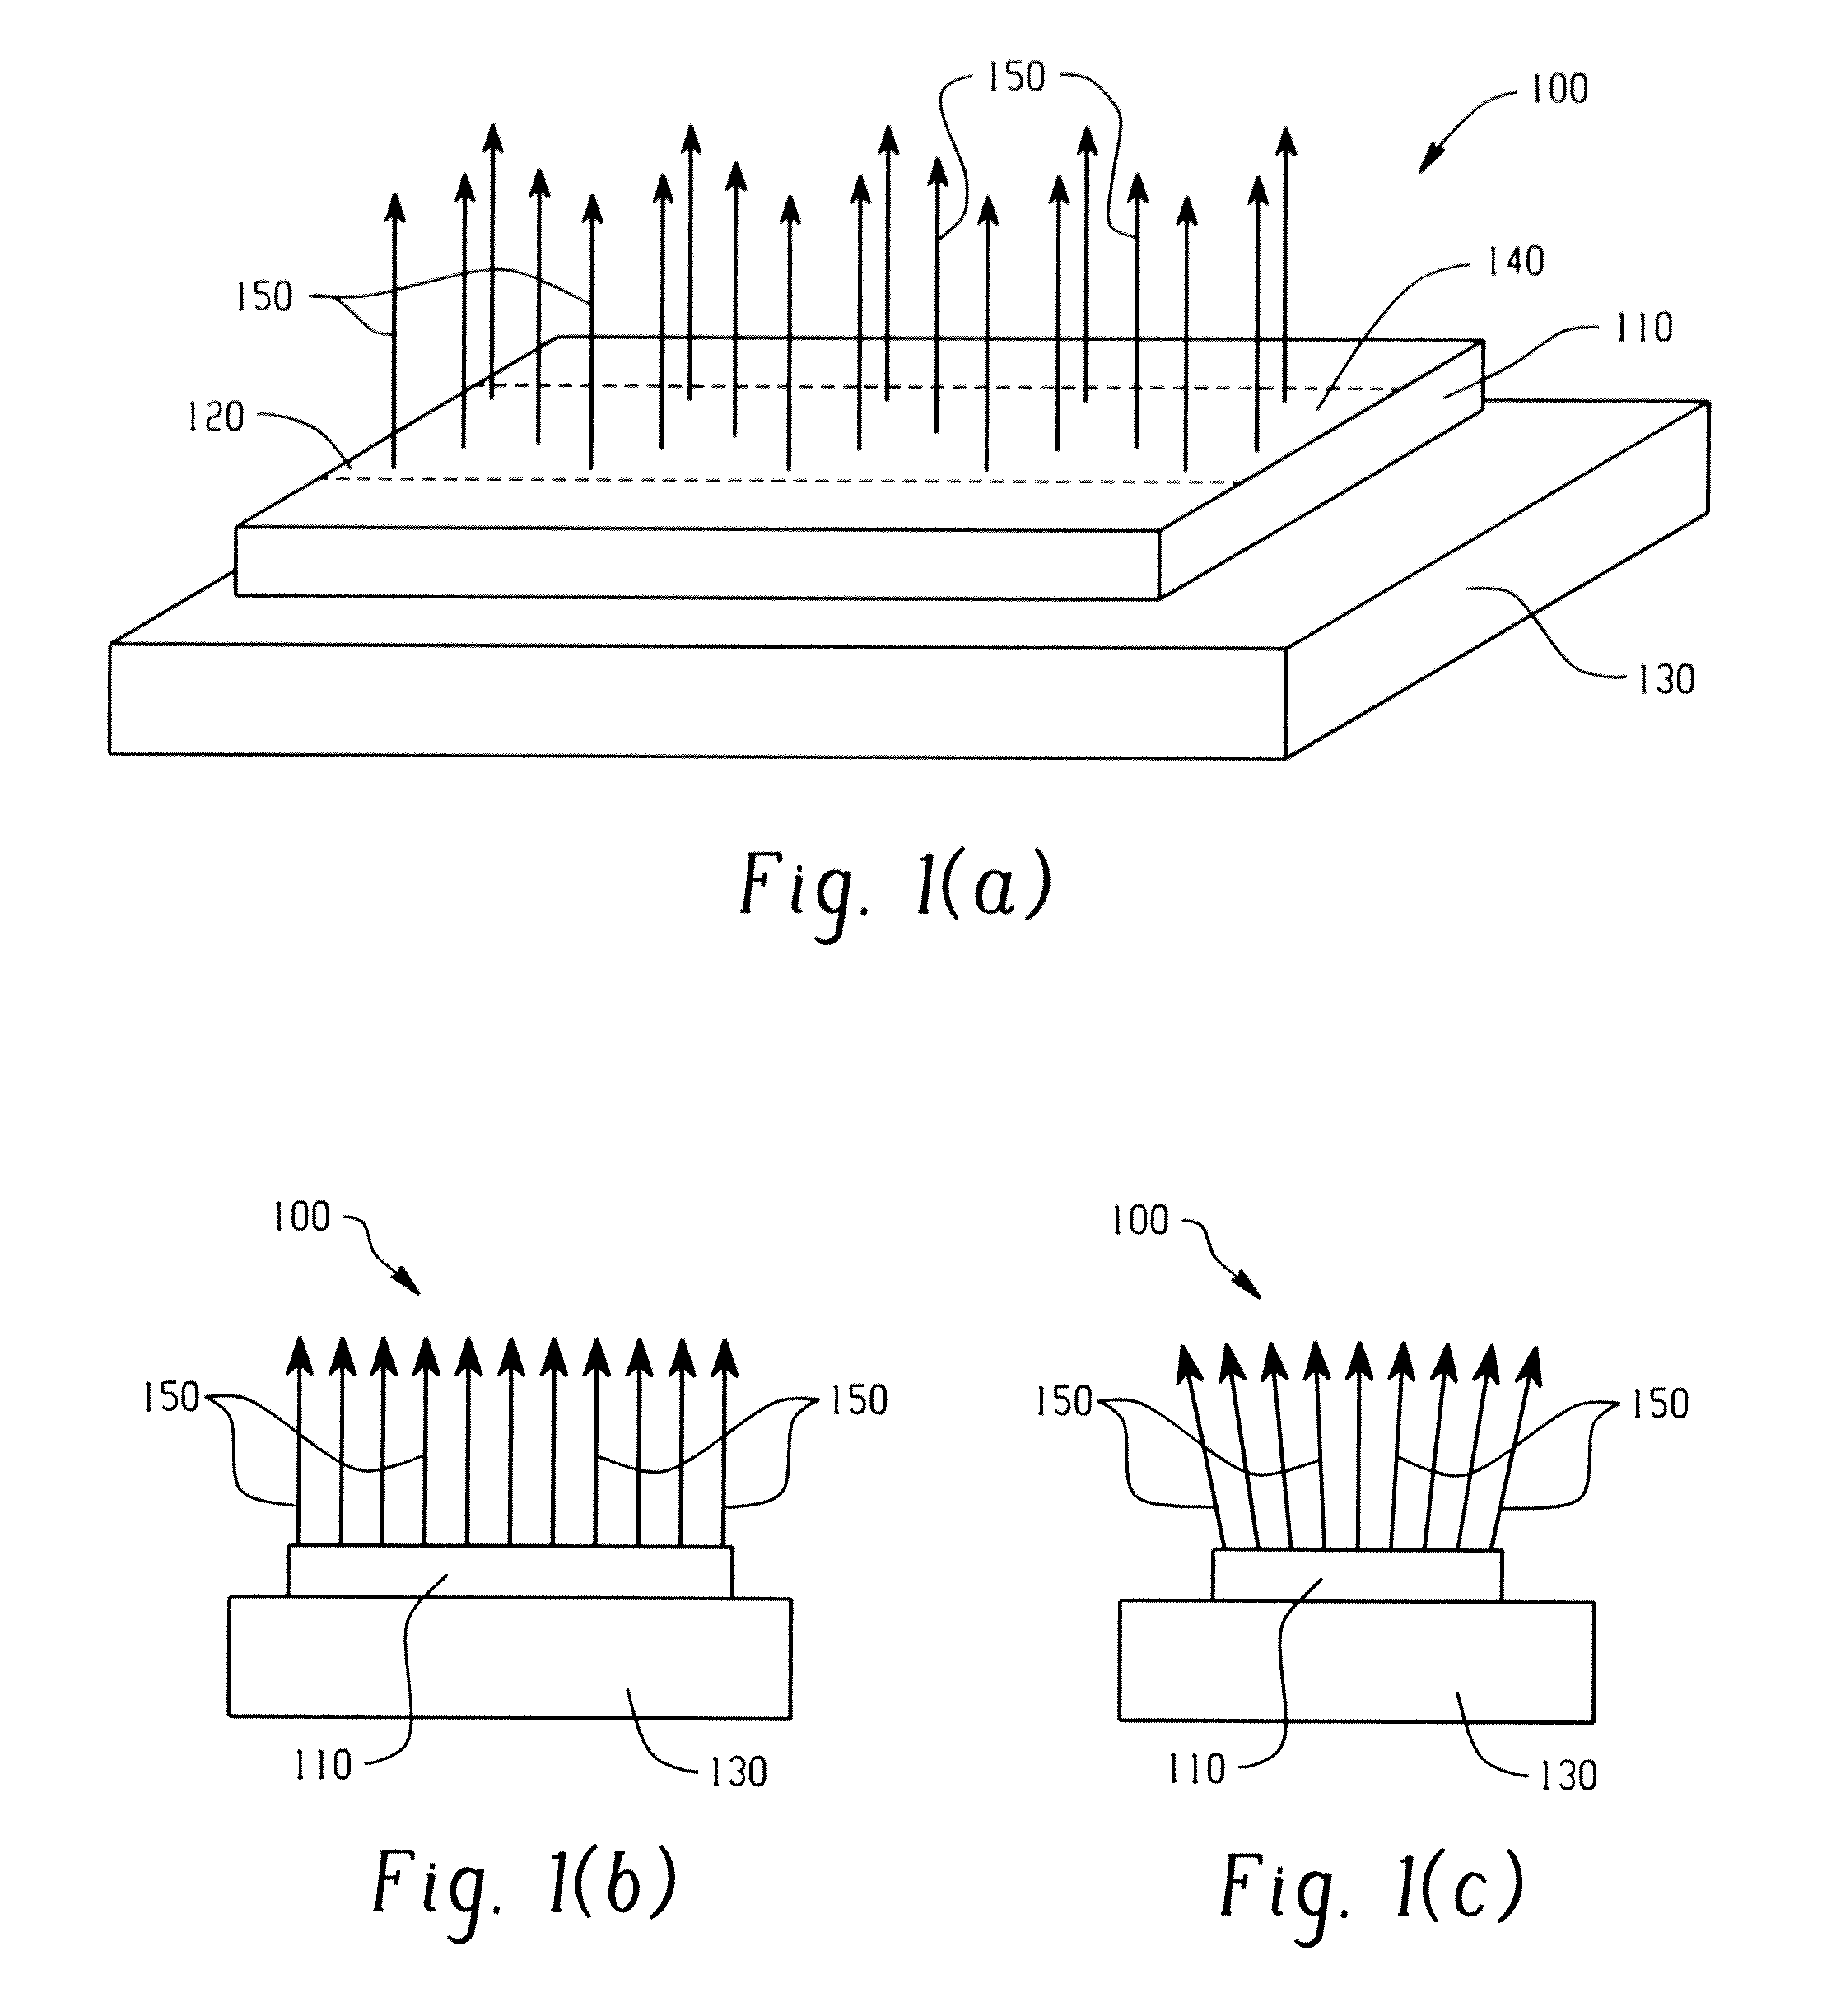 Digital heat injection by way of surface emitting semi-conductor devices